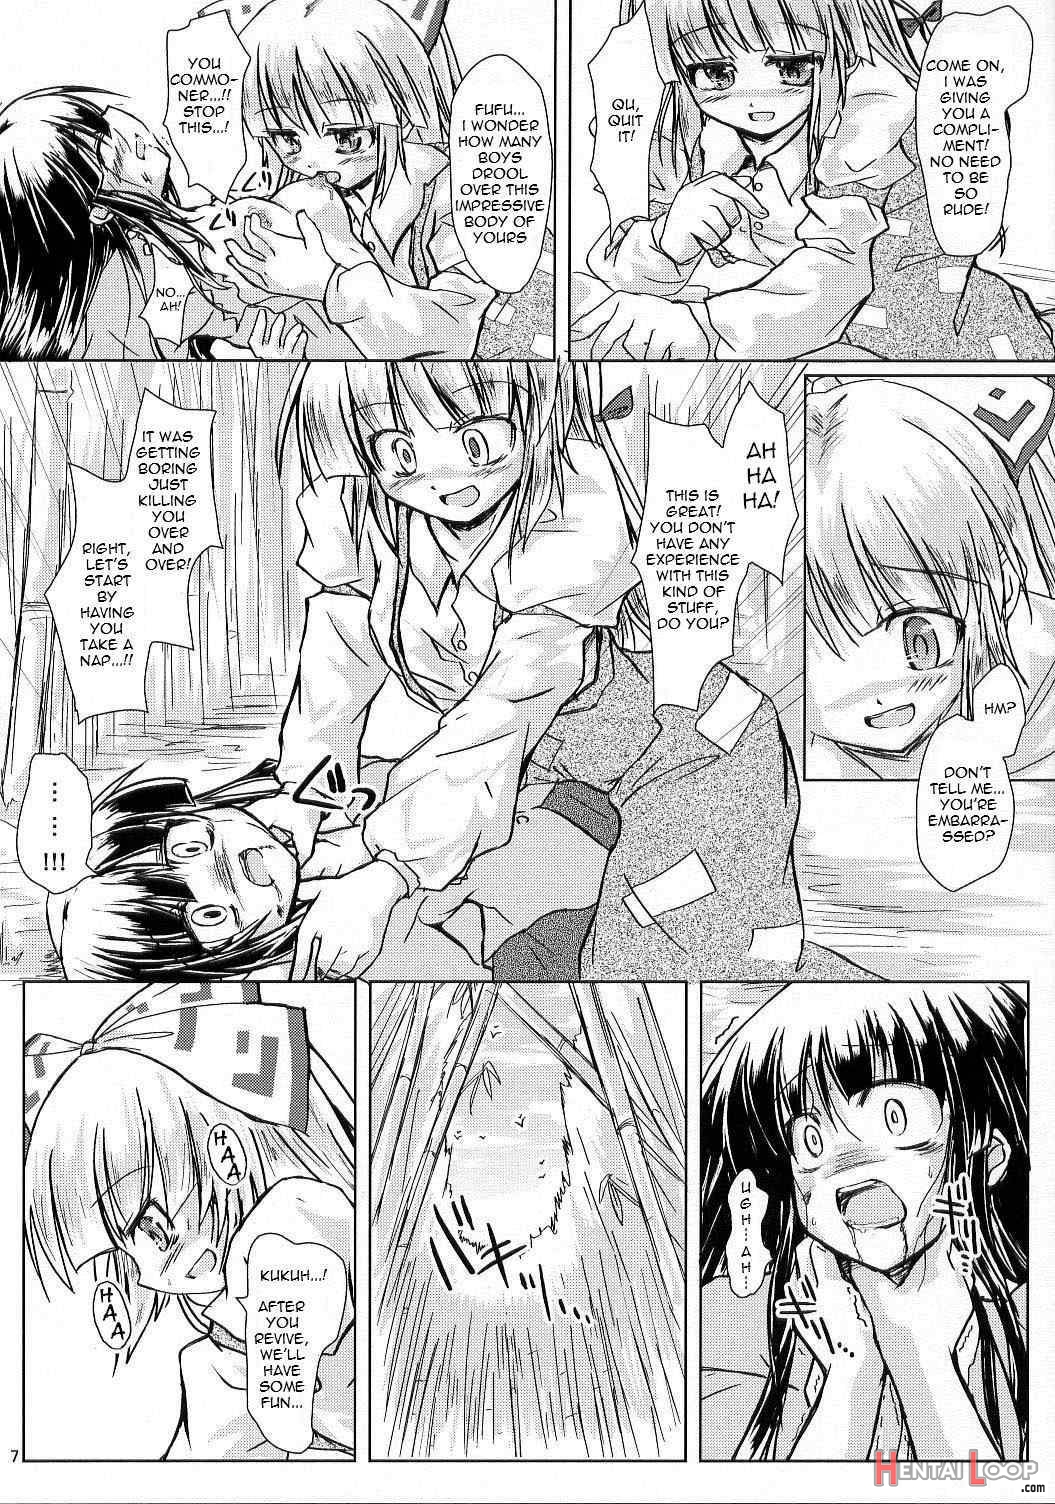 Hourai Geppei page 4